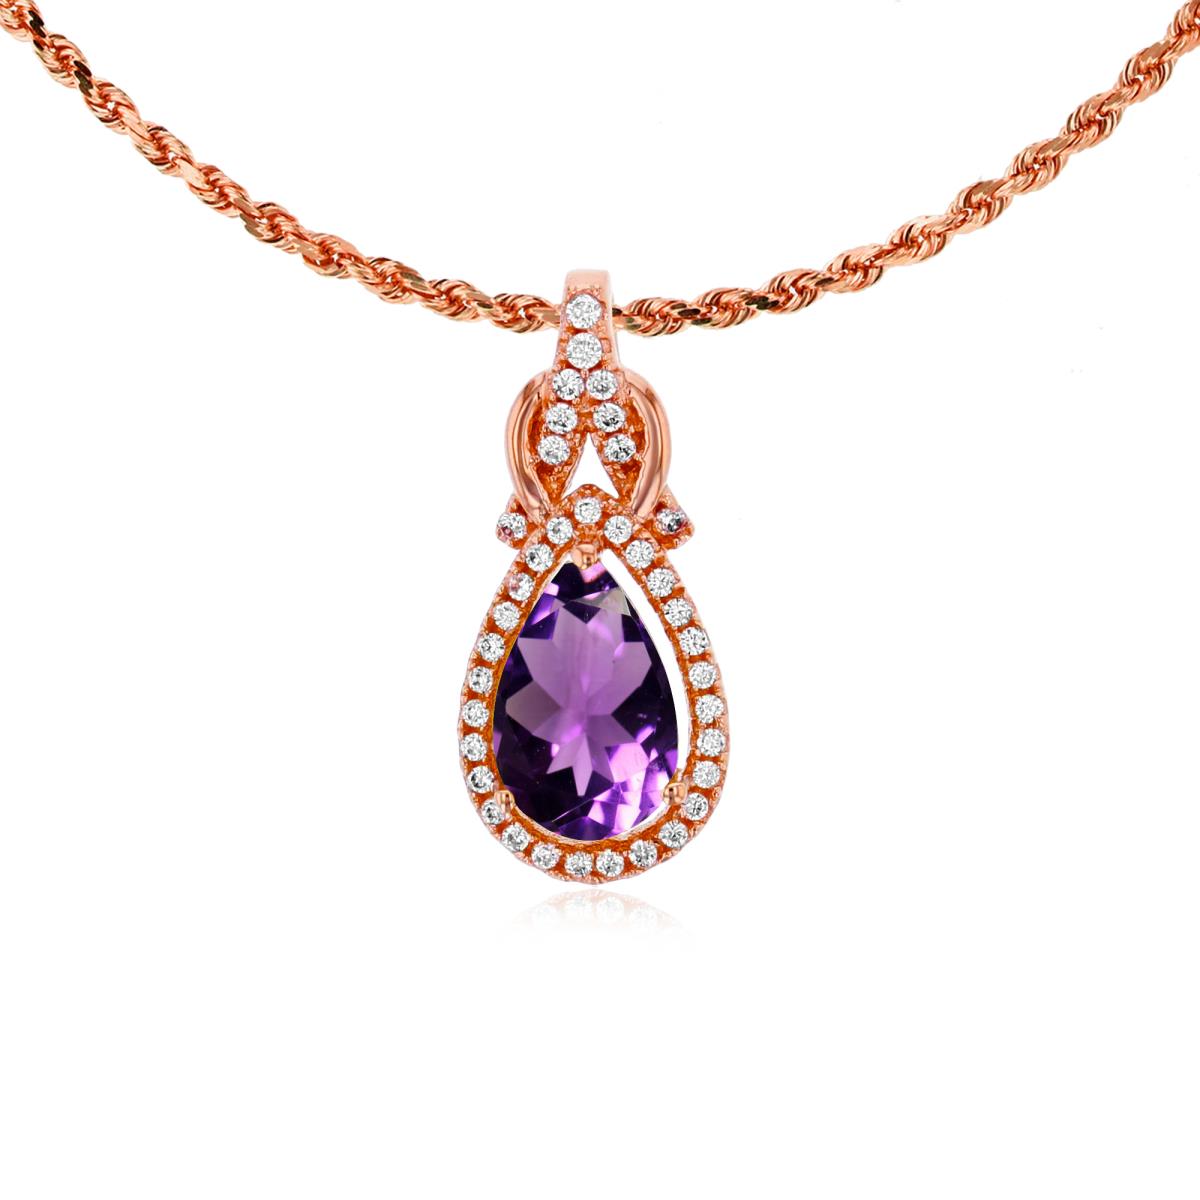 10K Rose Gold 8x5mm Pear Cut Amethyst & 0.11 CTTW Rnd Diamond Knot 18" Rope Chain Necklace